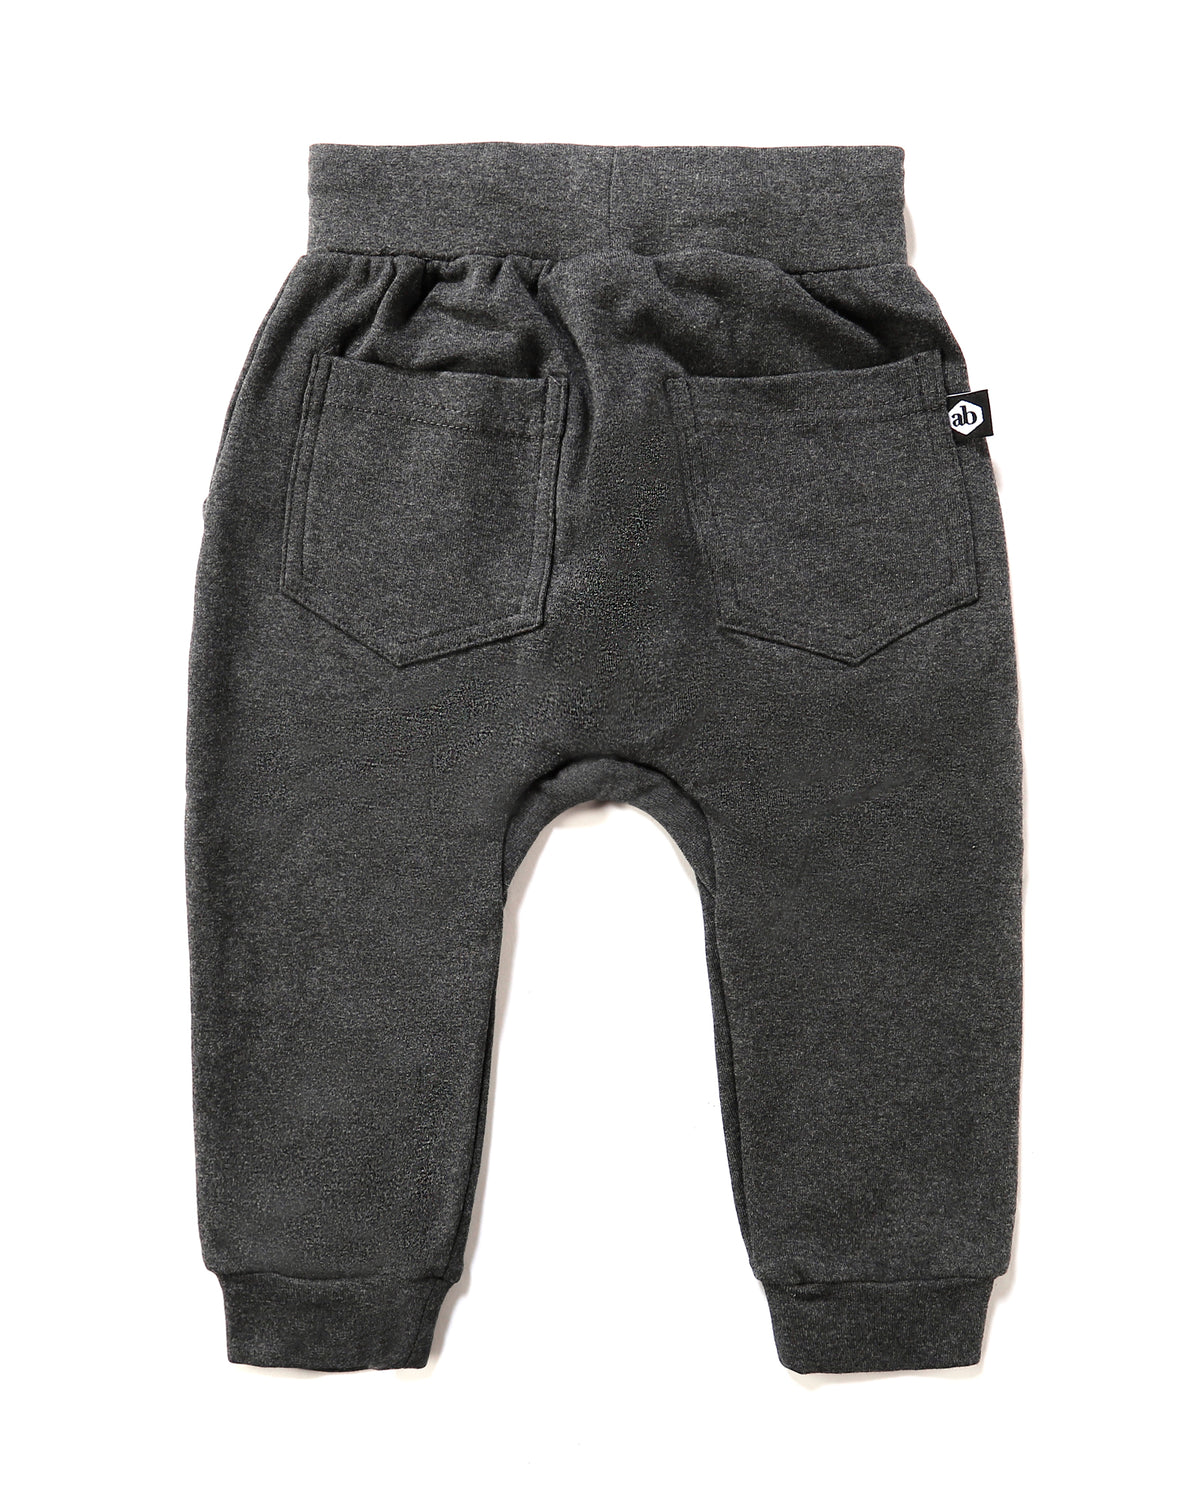 Slouch Trackie in Charcoal Back